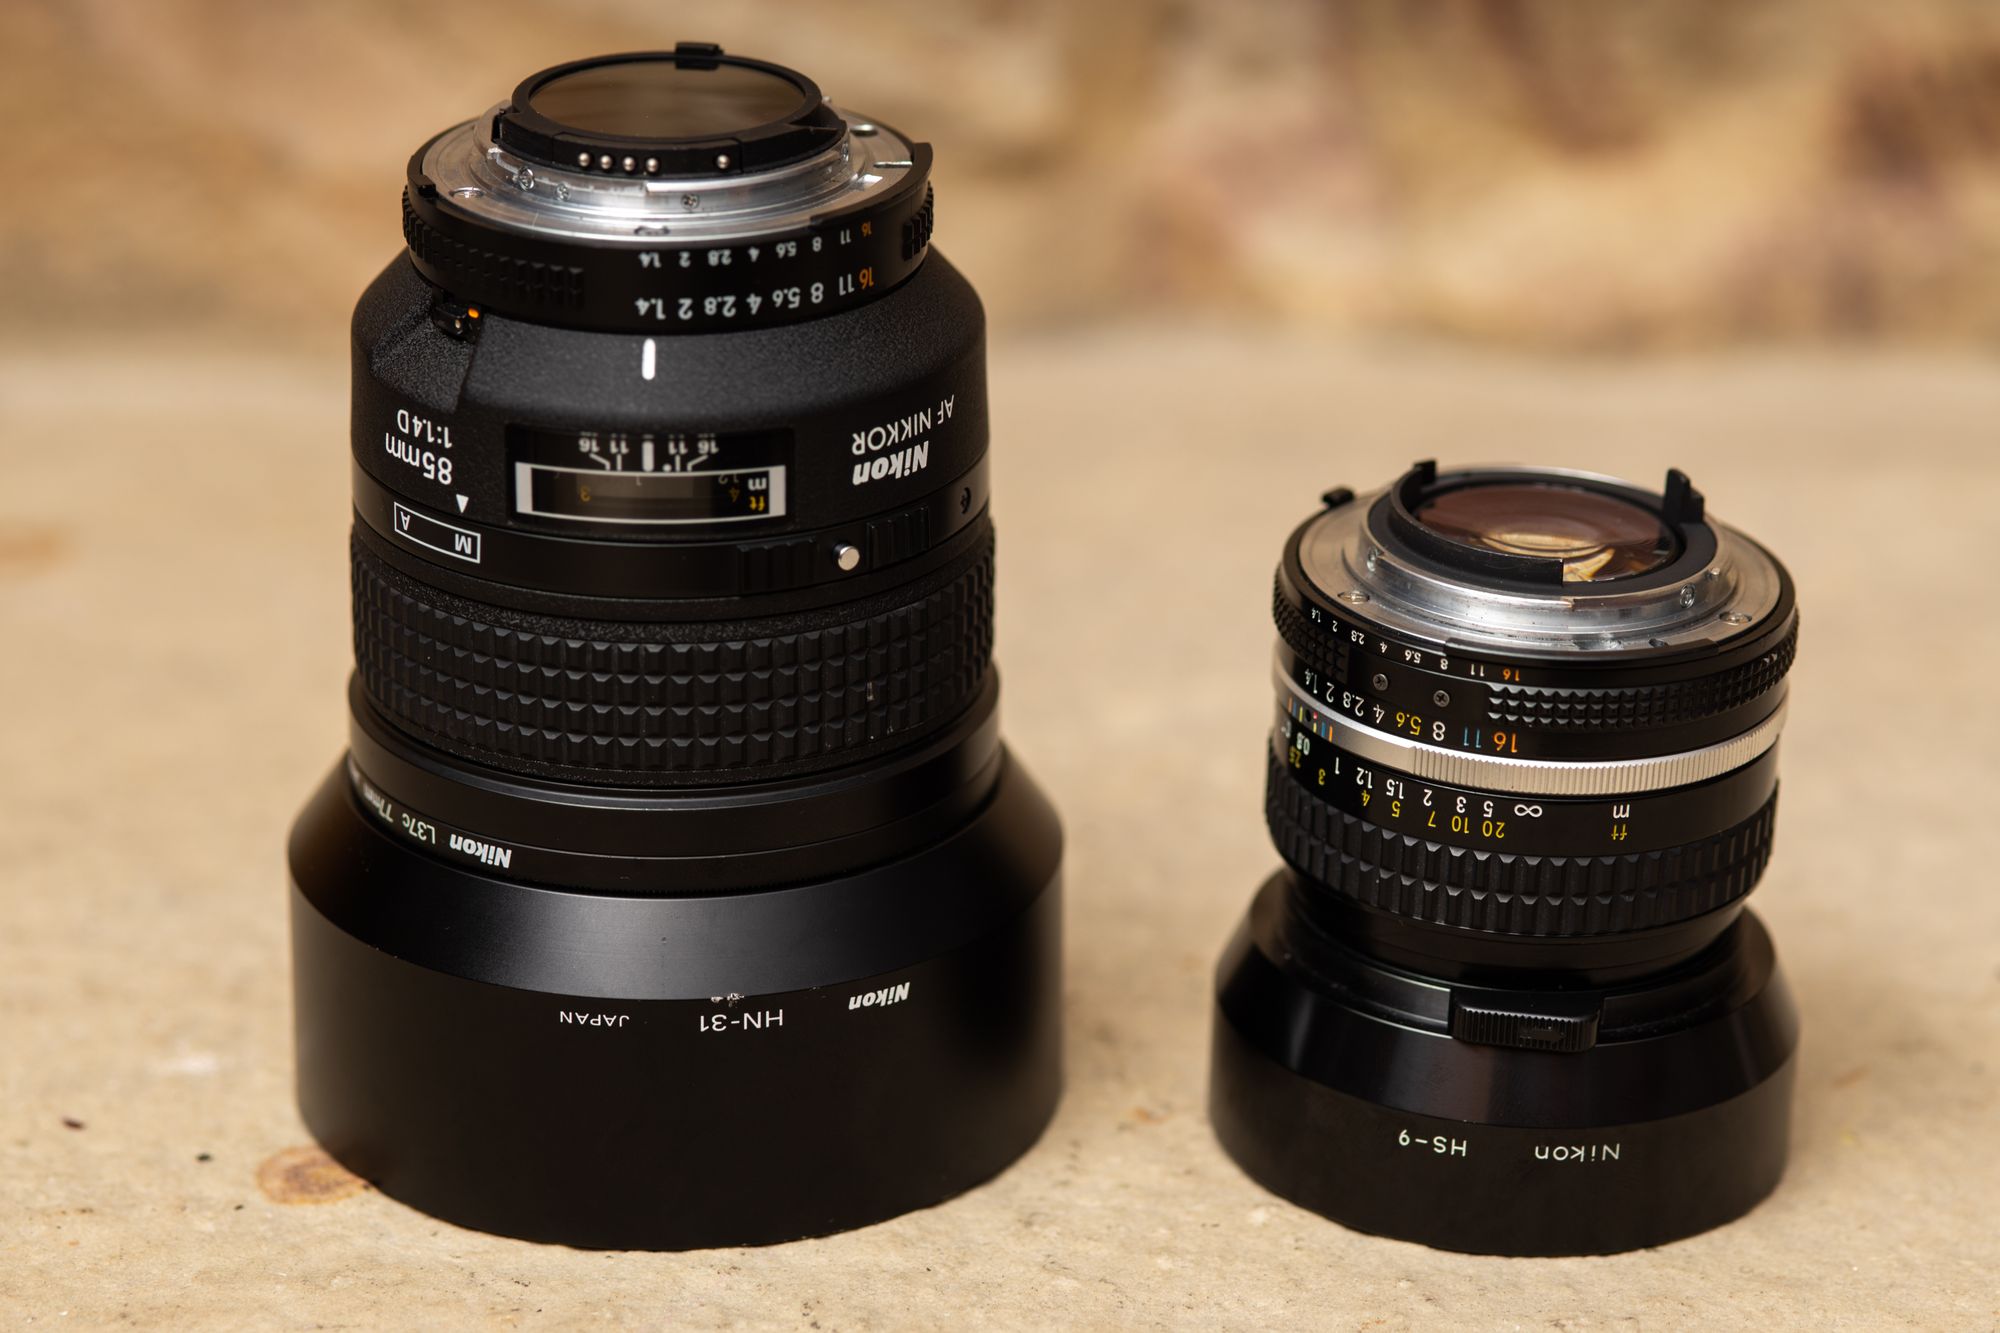 Back to the Basics: My Experiences With the Nikkor 50mm F/1.4 AI-s